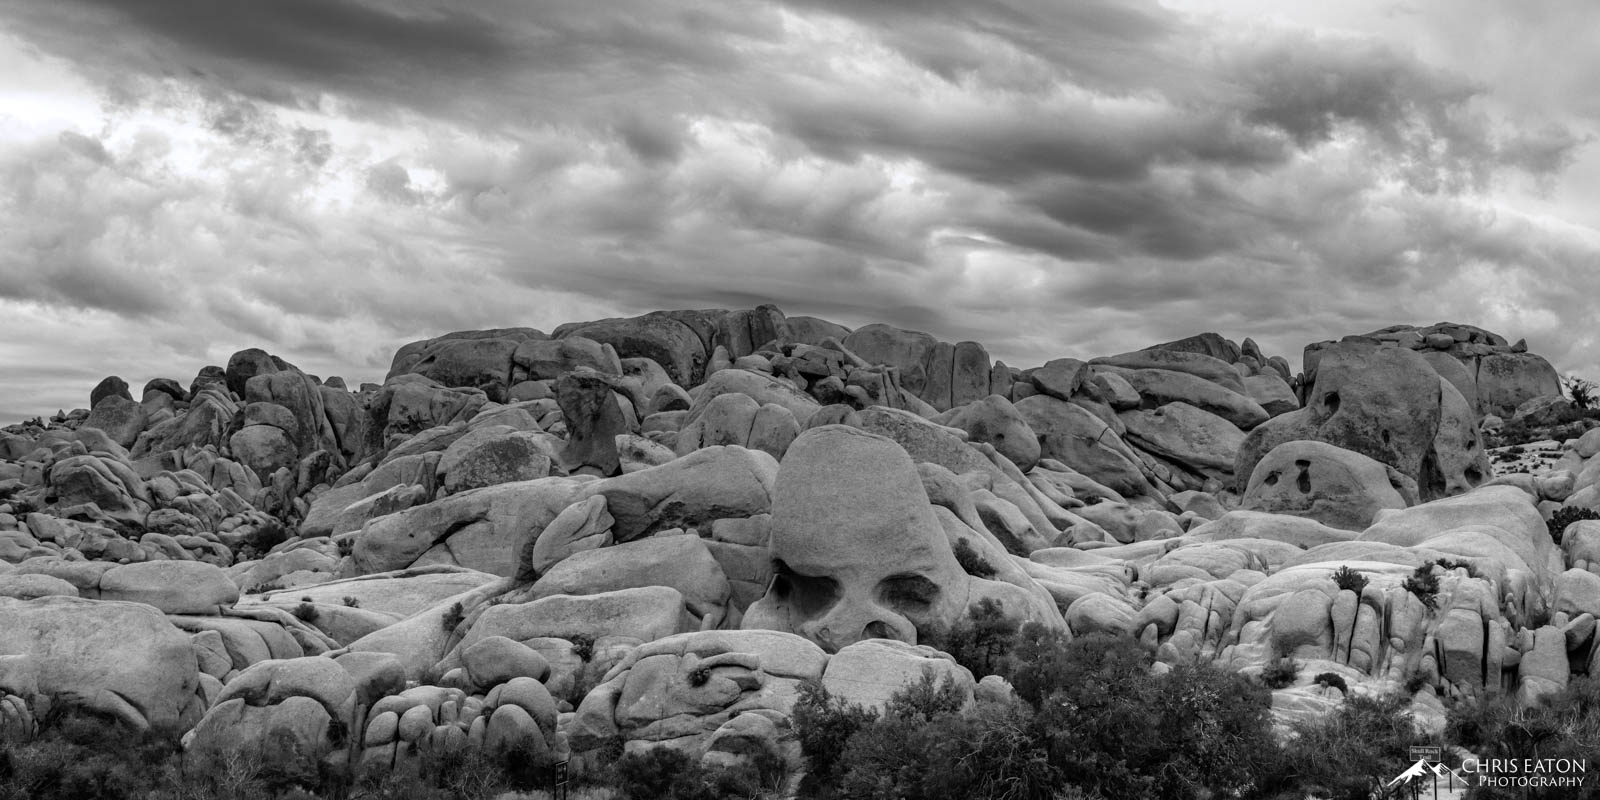 One of the defining features of Joshua Tree National Park is the monzogranite. Formed deep in the earth and then exposed by erosion...